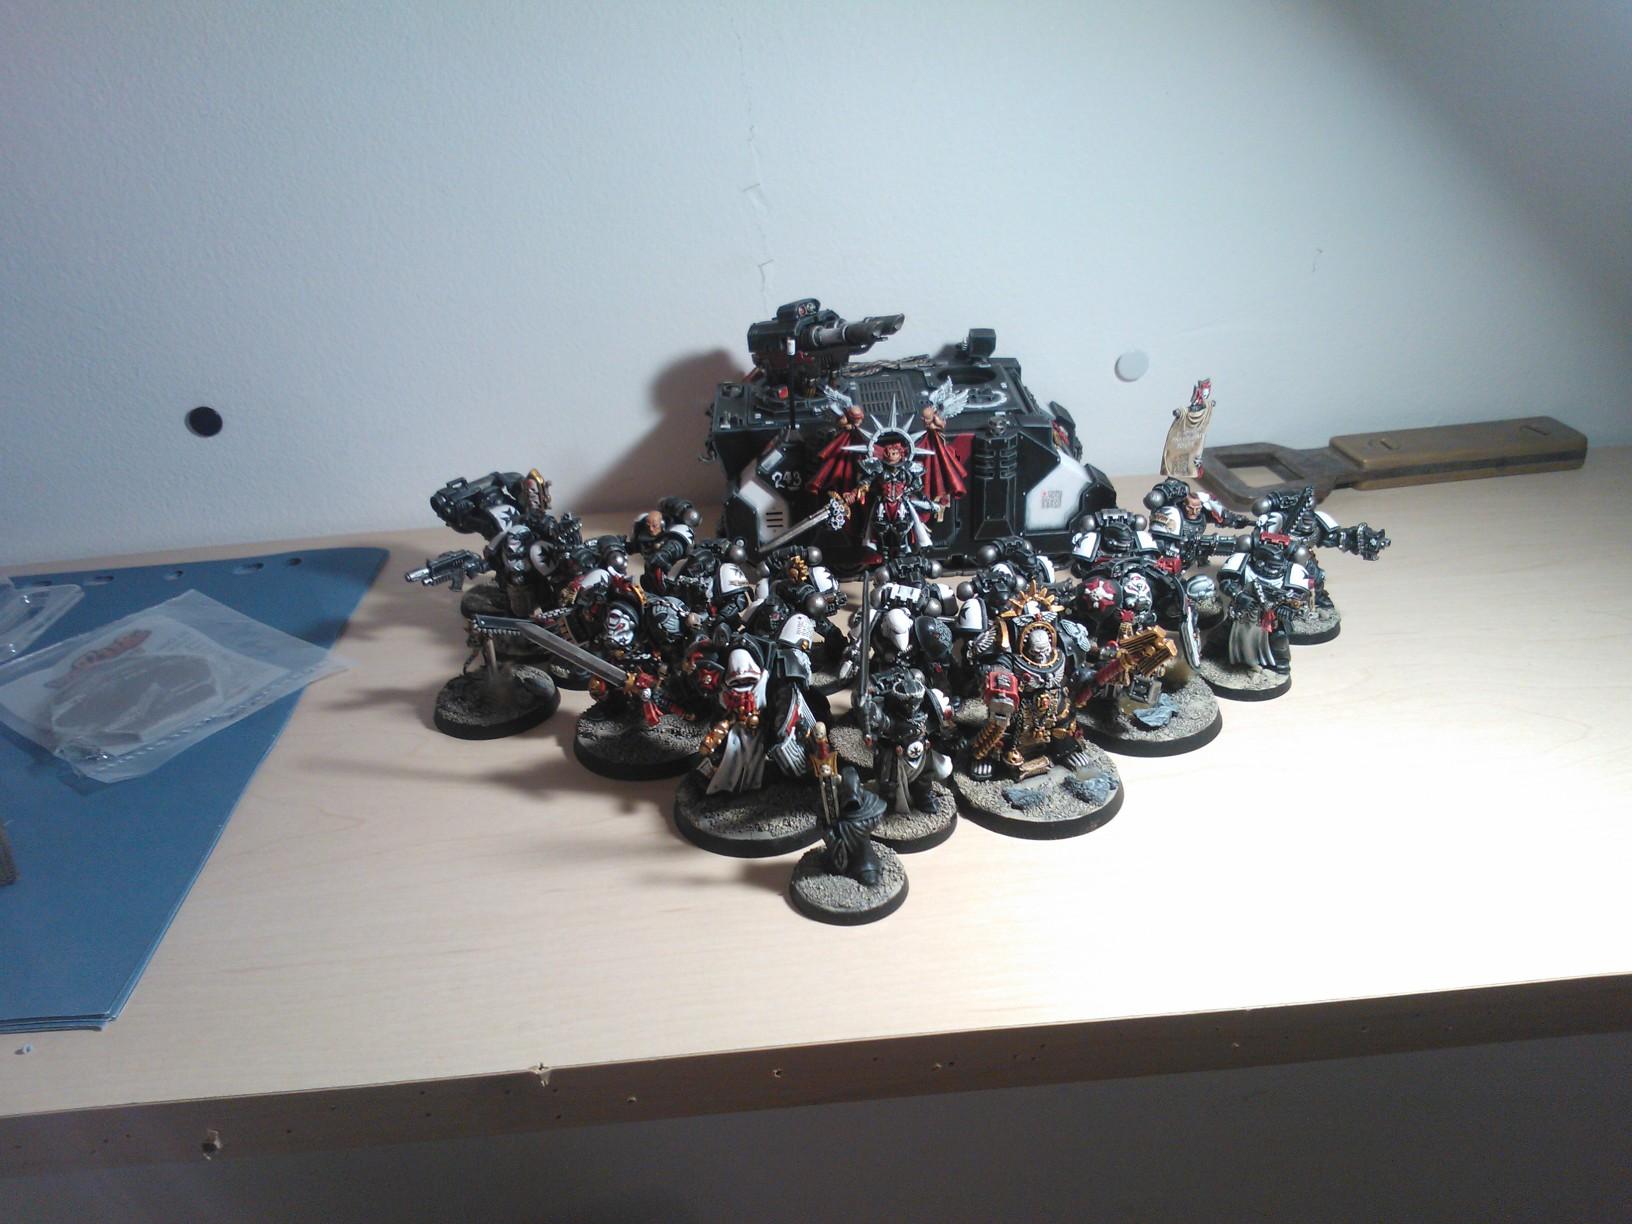 Adepta Sororitas, Army, Assault, Black, Black Templars, Blanche, Chainsword, Collection, Conversion, Crusade, Crusader, Crusader Squad, Forge World, Imperium, Sergeant, Sisters Of Batte, Space Marines, Sword Brother, Tactical Squad, Templars, Terminator Armor